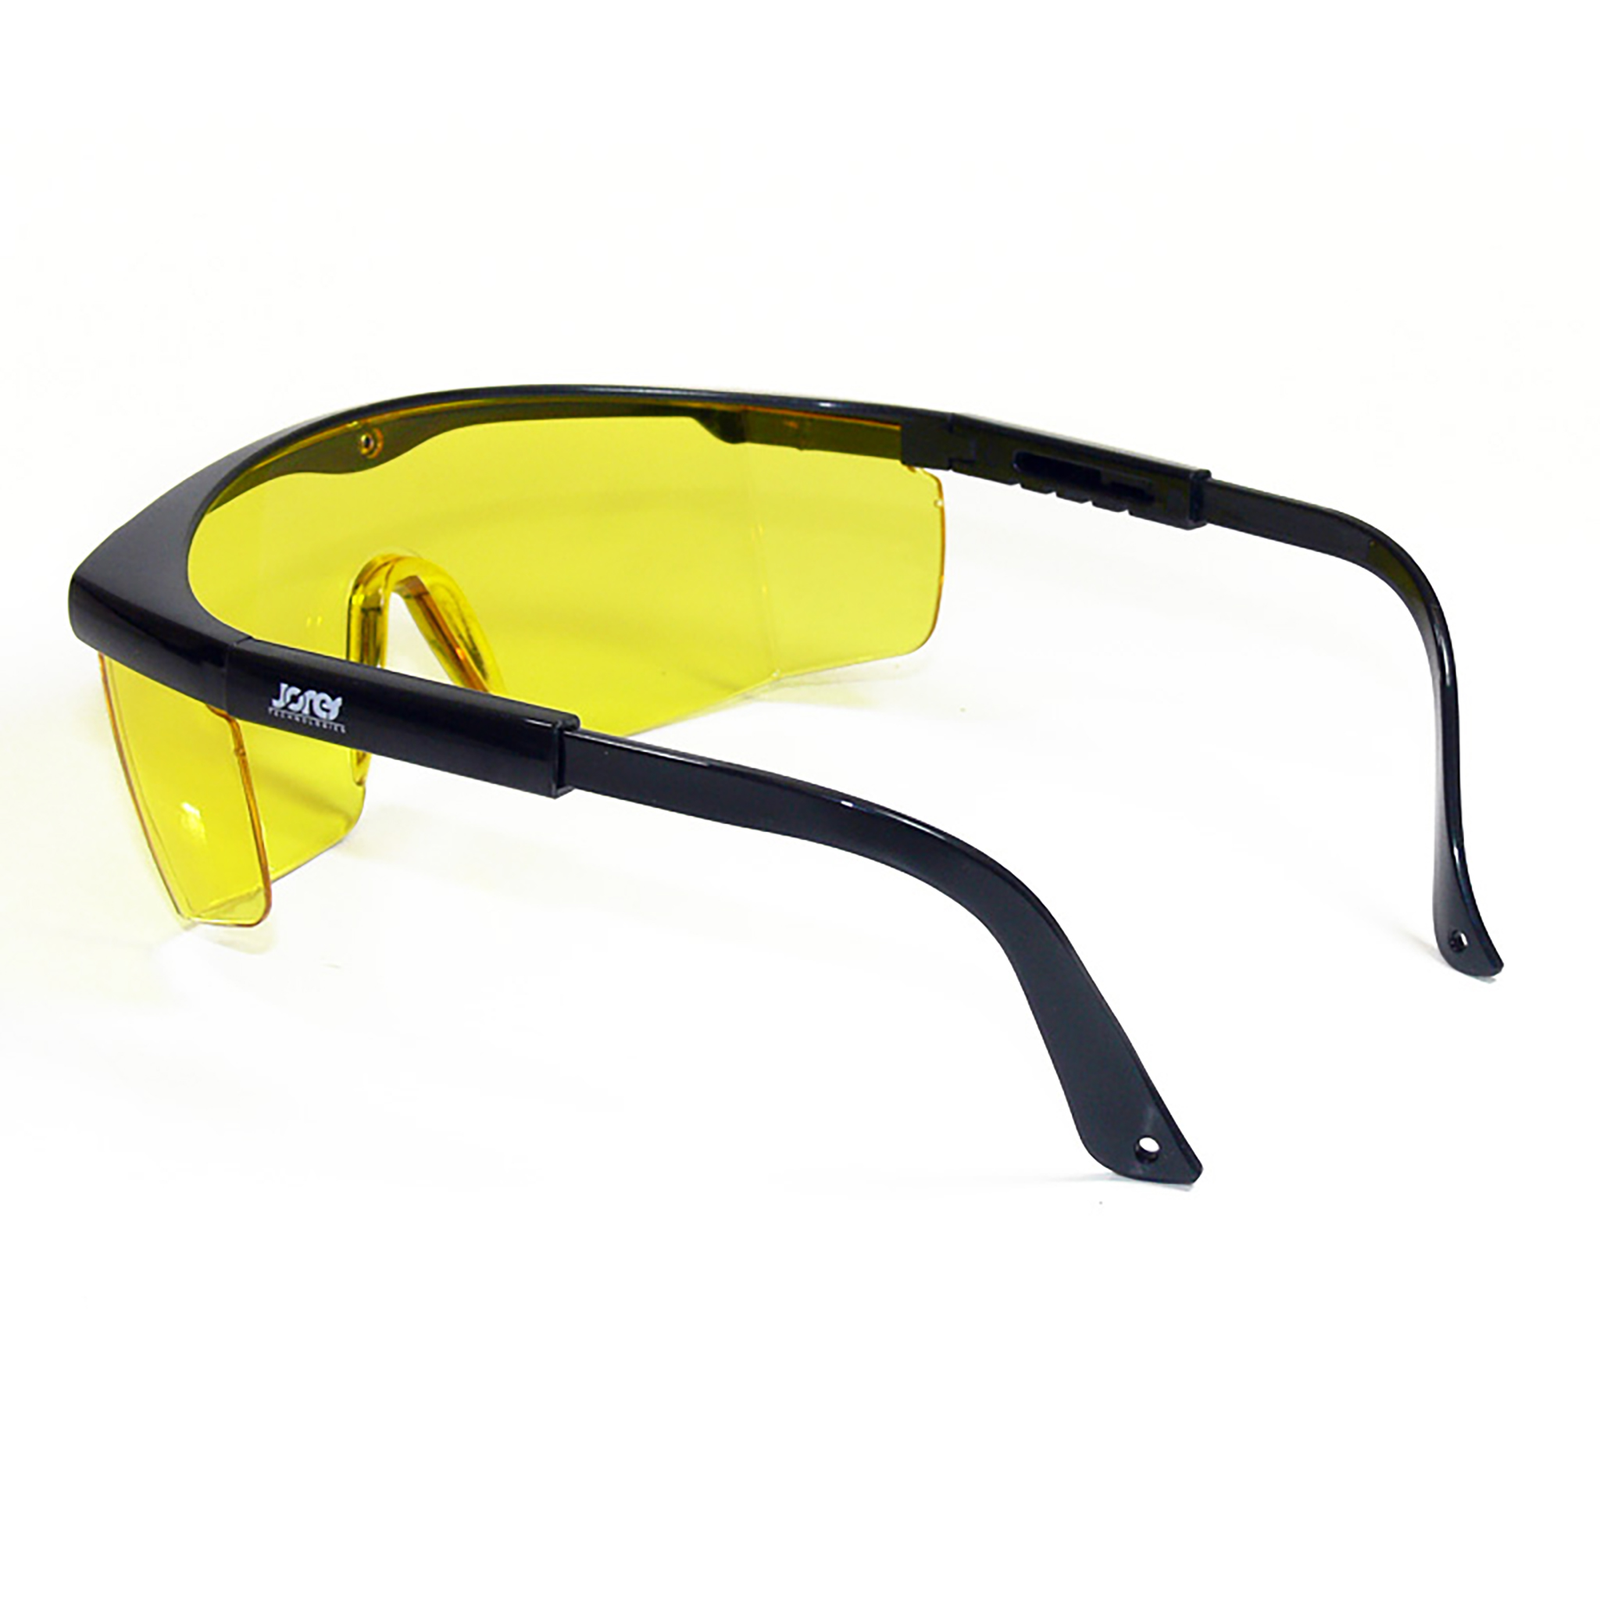 back view of the black framed rectangular safety yellow glasses with side shields for high impact protection with adjustable temple legs